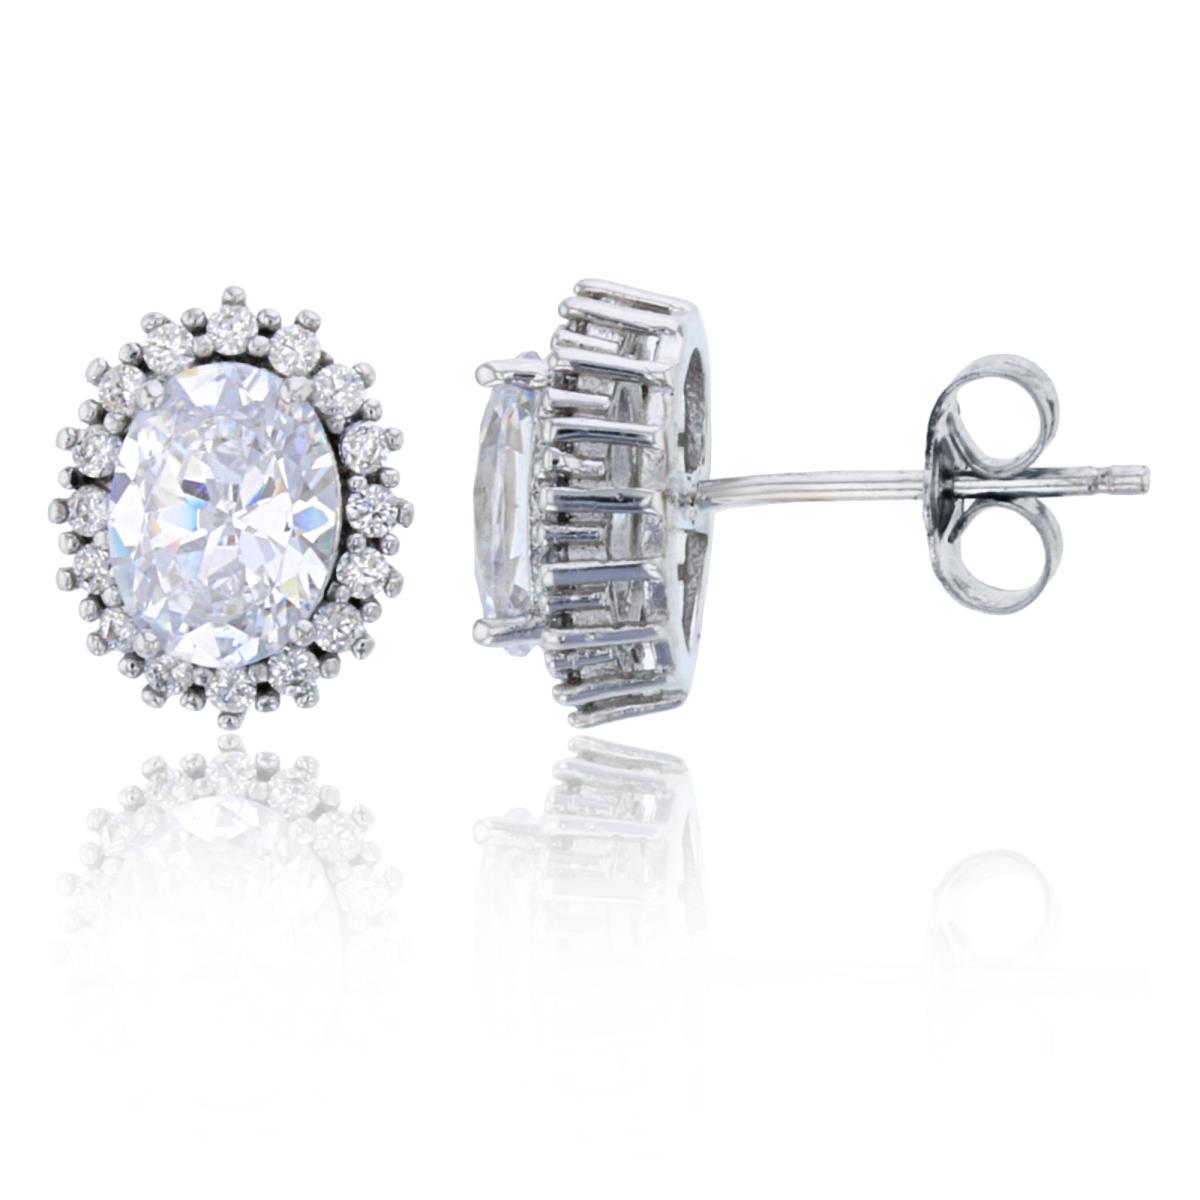 Sterling Silver 10x8mm Pave Halo Stud Earring